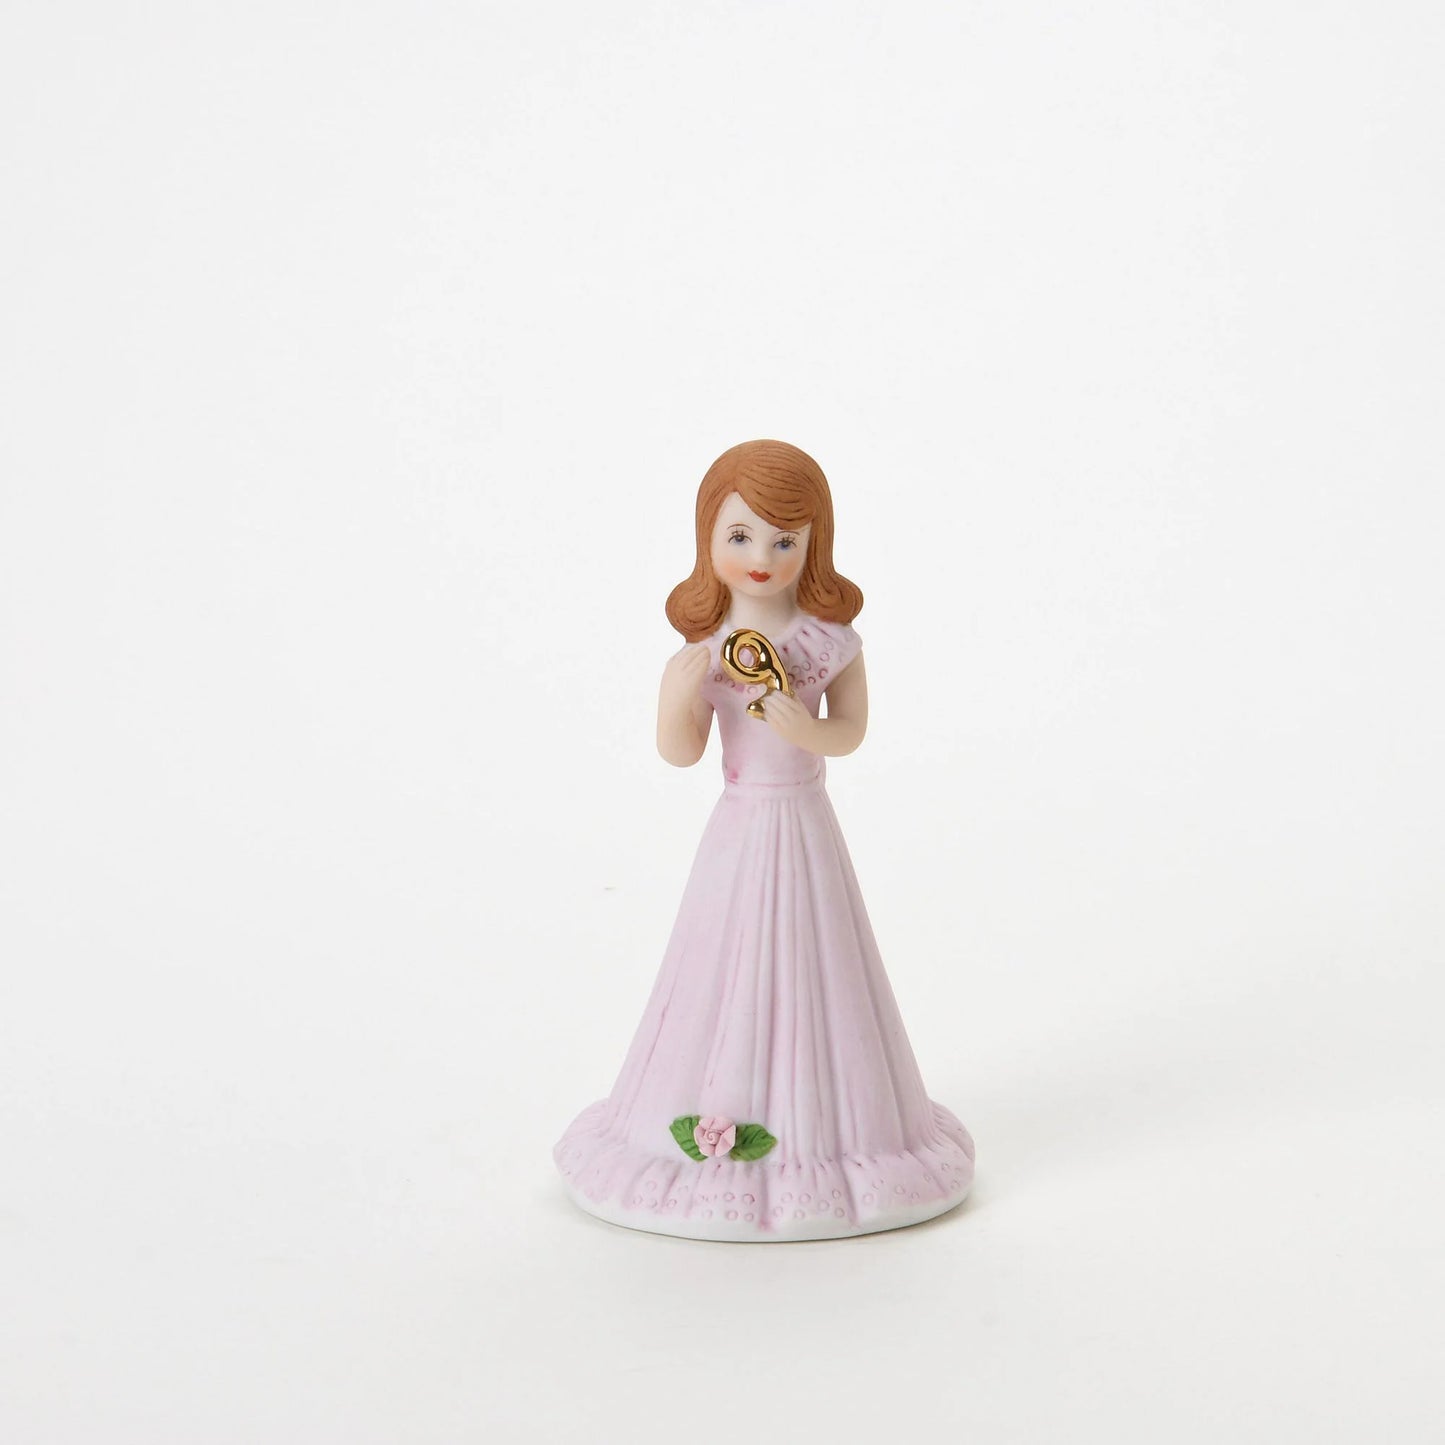 age 9 figurine front